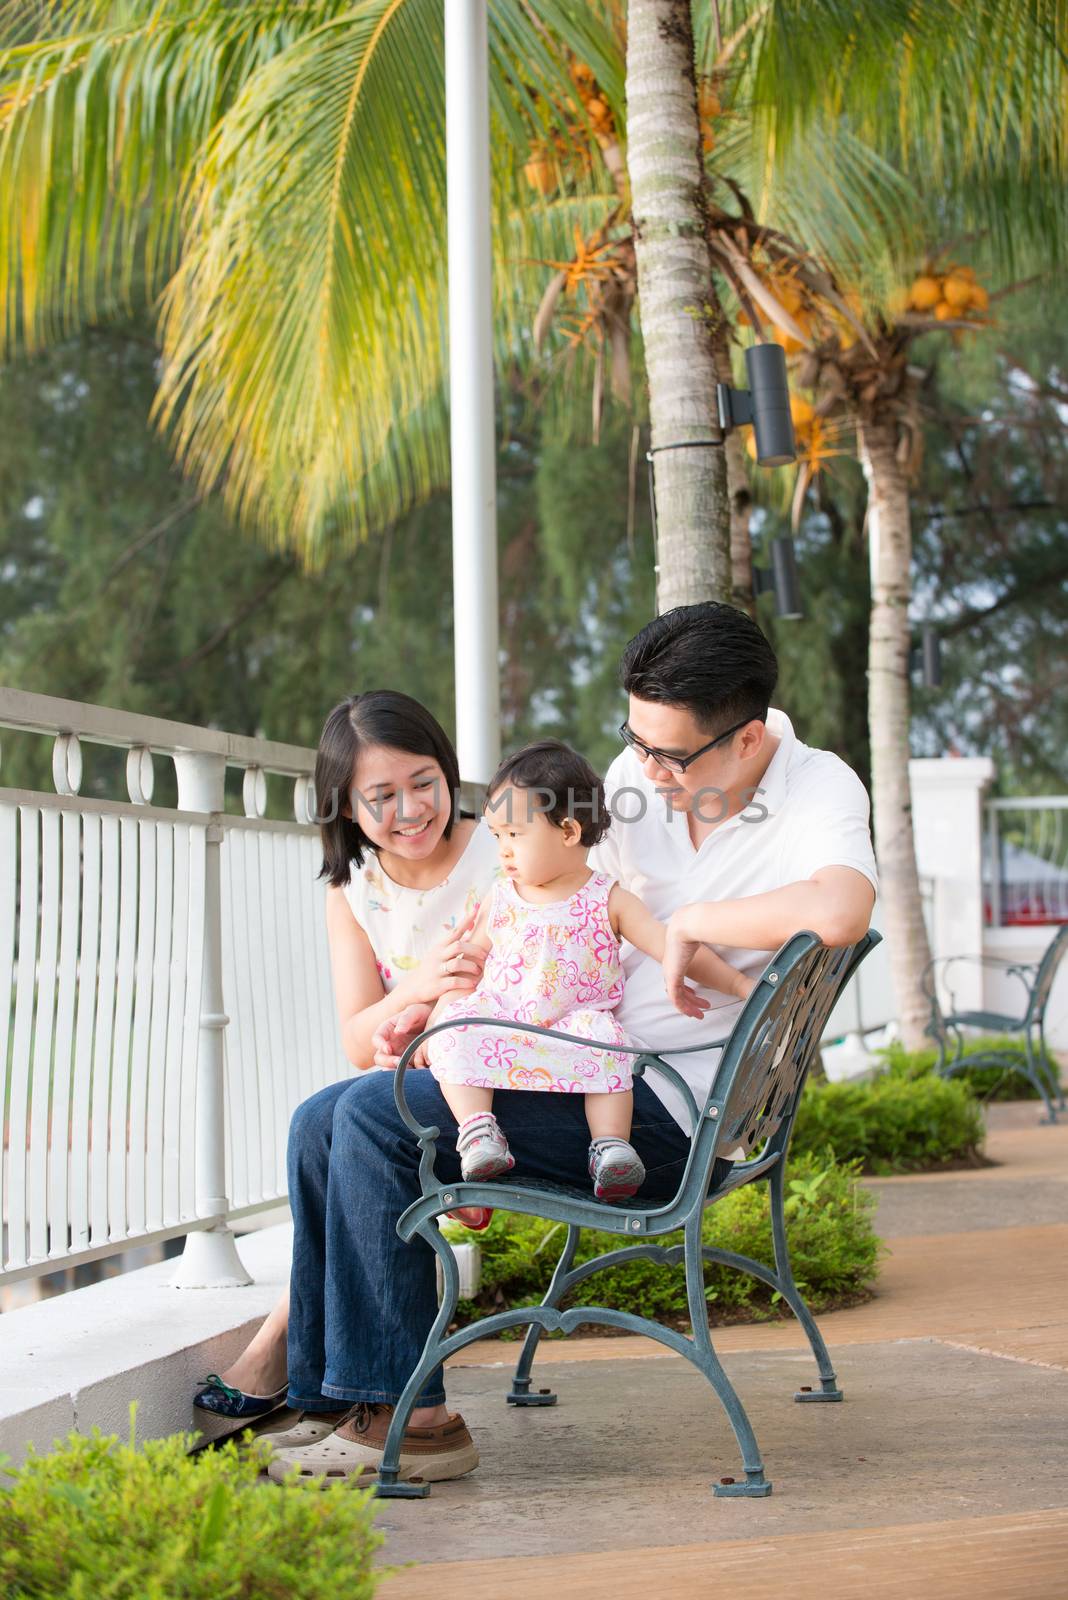 Happy Asian family portrait sitting at outdoor bench.